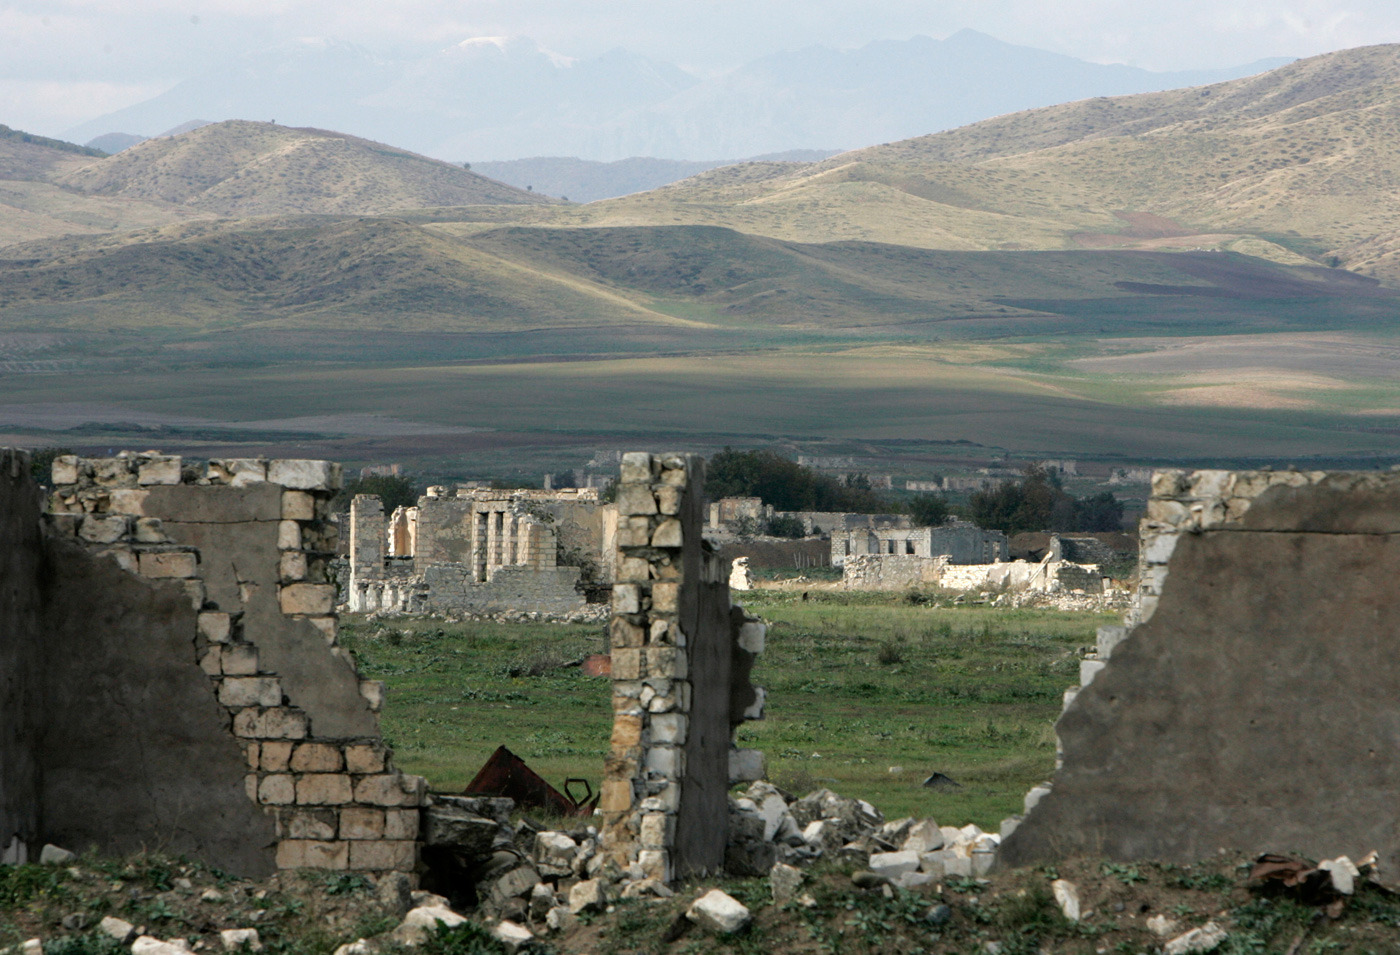 Azerbaijan to restore a cultural heritage belonging not only to Muslims, but all religions in Karabakh